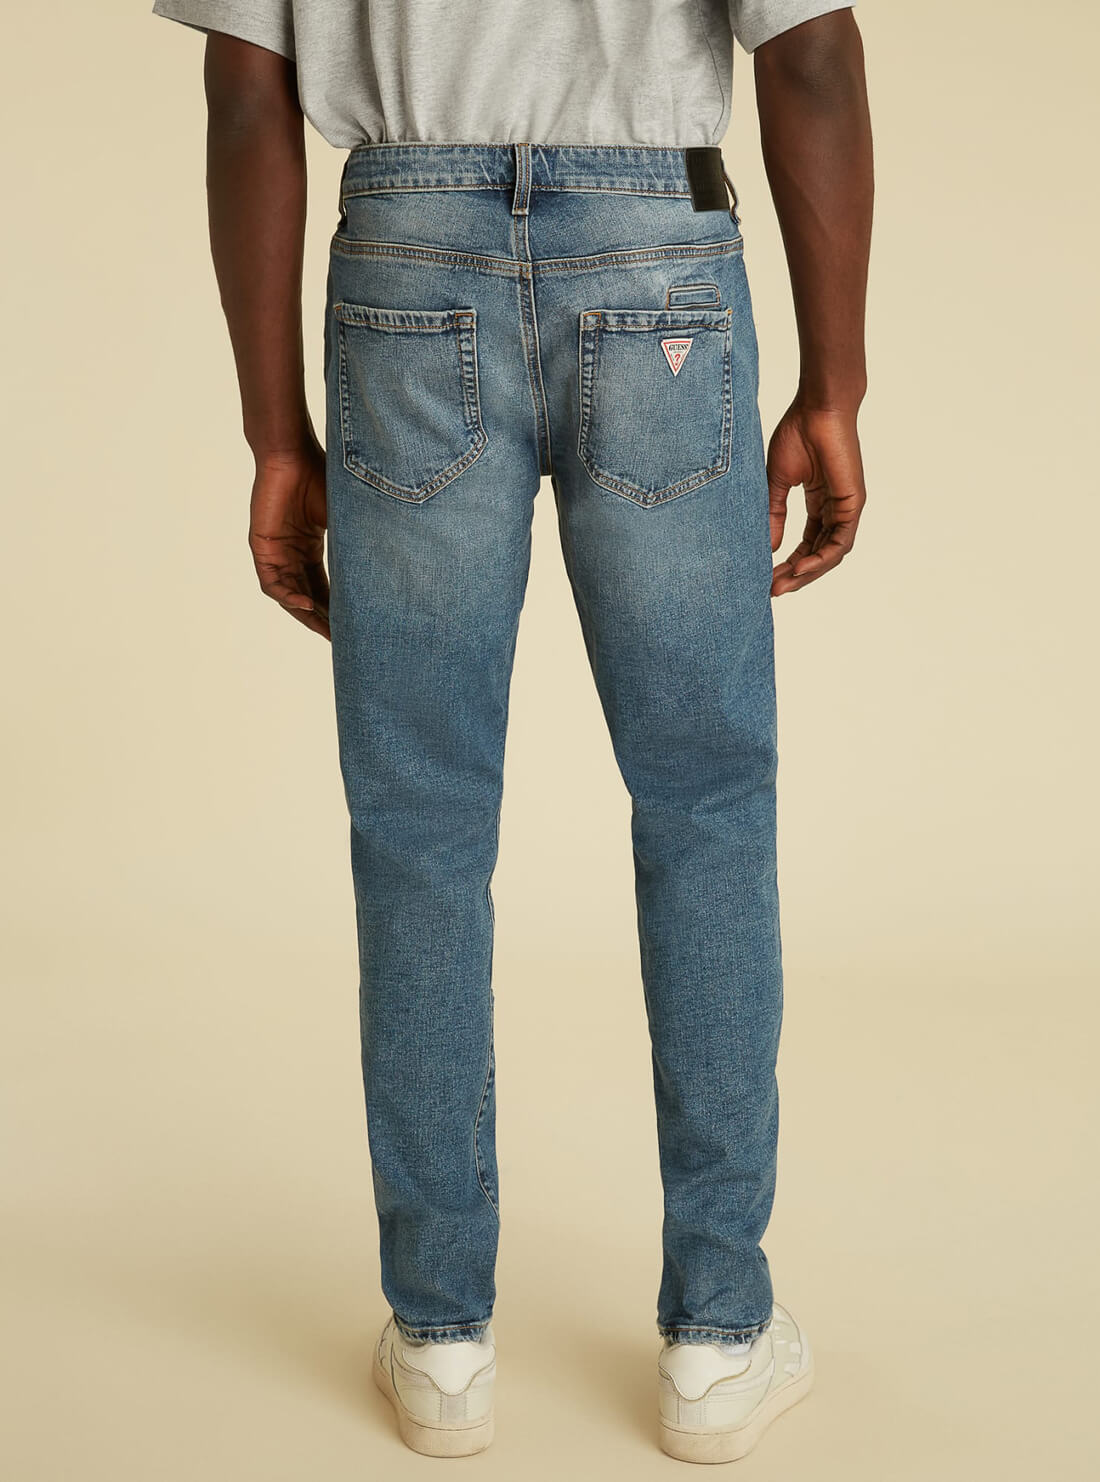 GUESS Mens GUESS Originals Mid-Rise Slim Straight Denim Jeans in Vintage Stone Wash  M1GA05R49T0 Model Back View